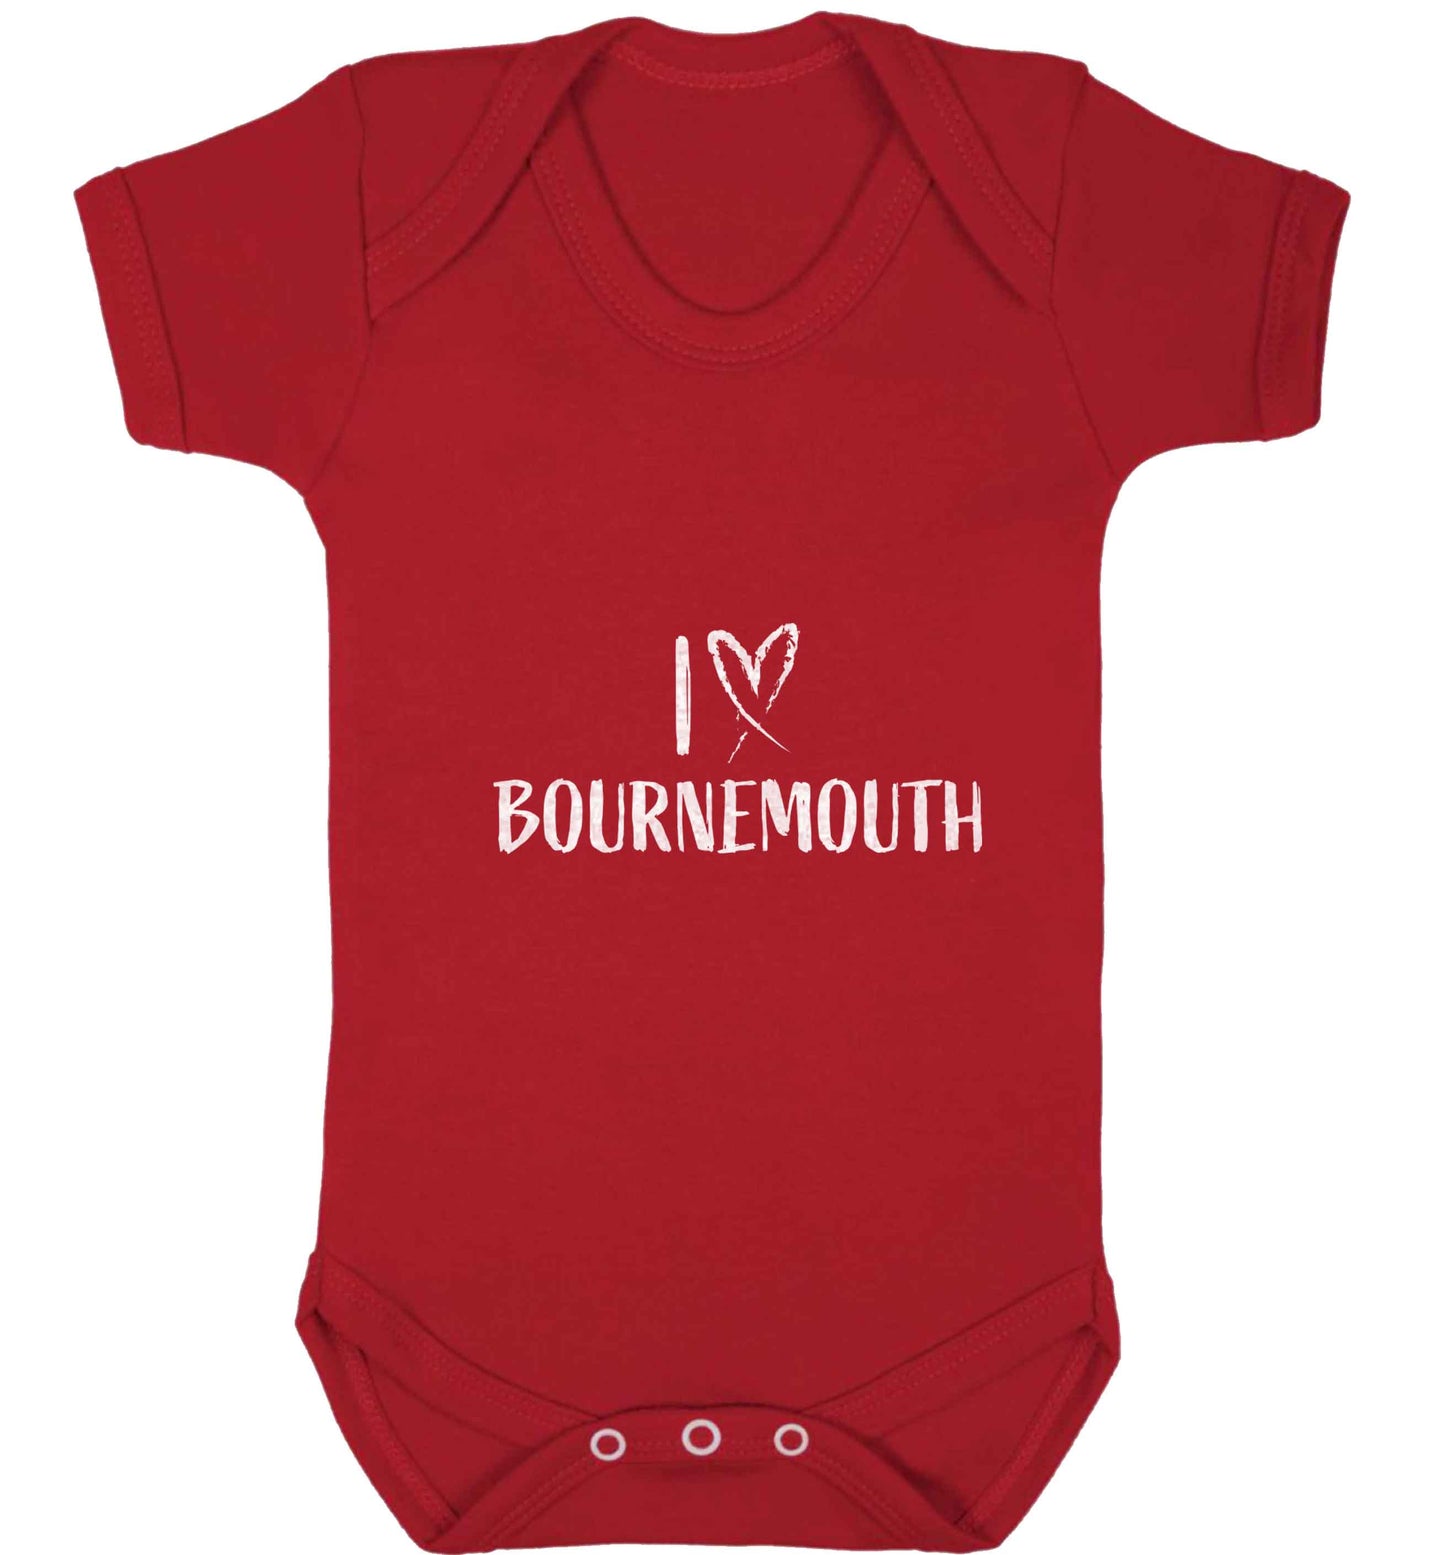 I love Bournemouth baby vest red 18-24 months